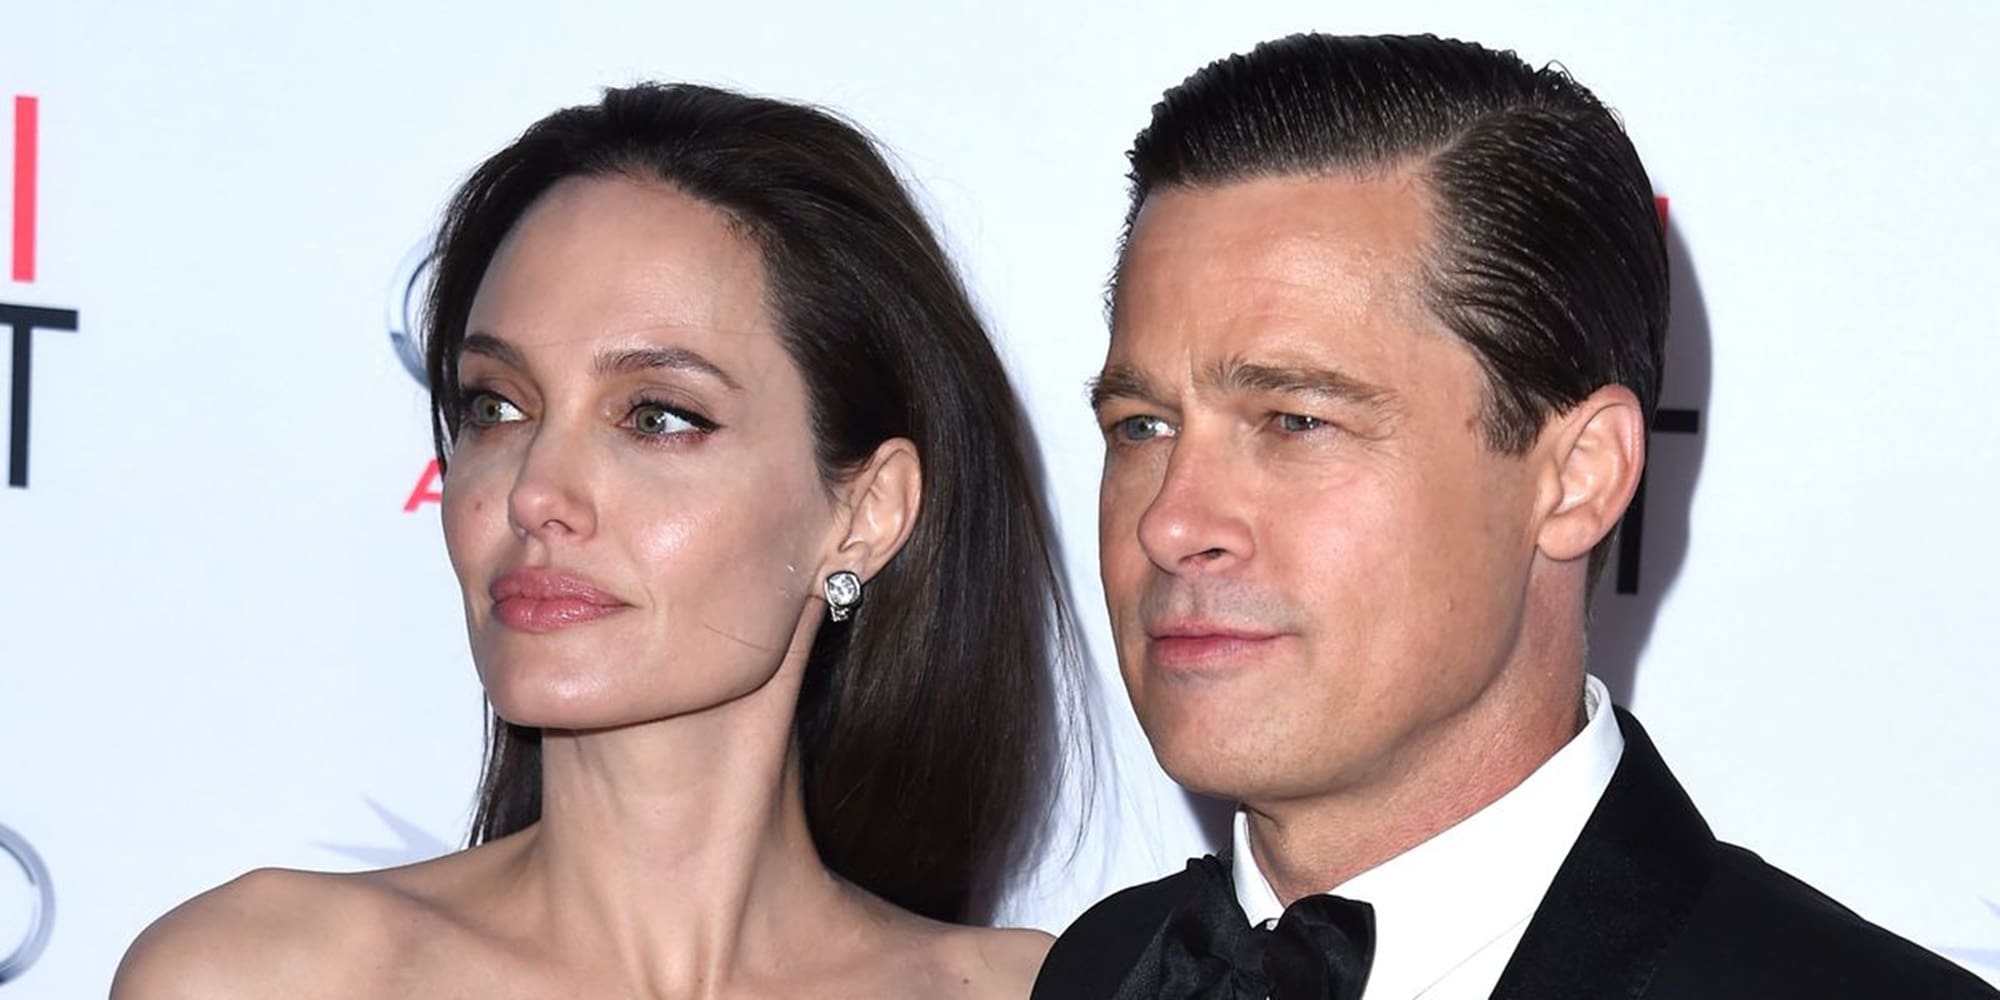 Brad Pitt and Angelina Jolie are officially legally single but not divorced